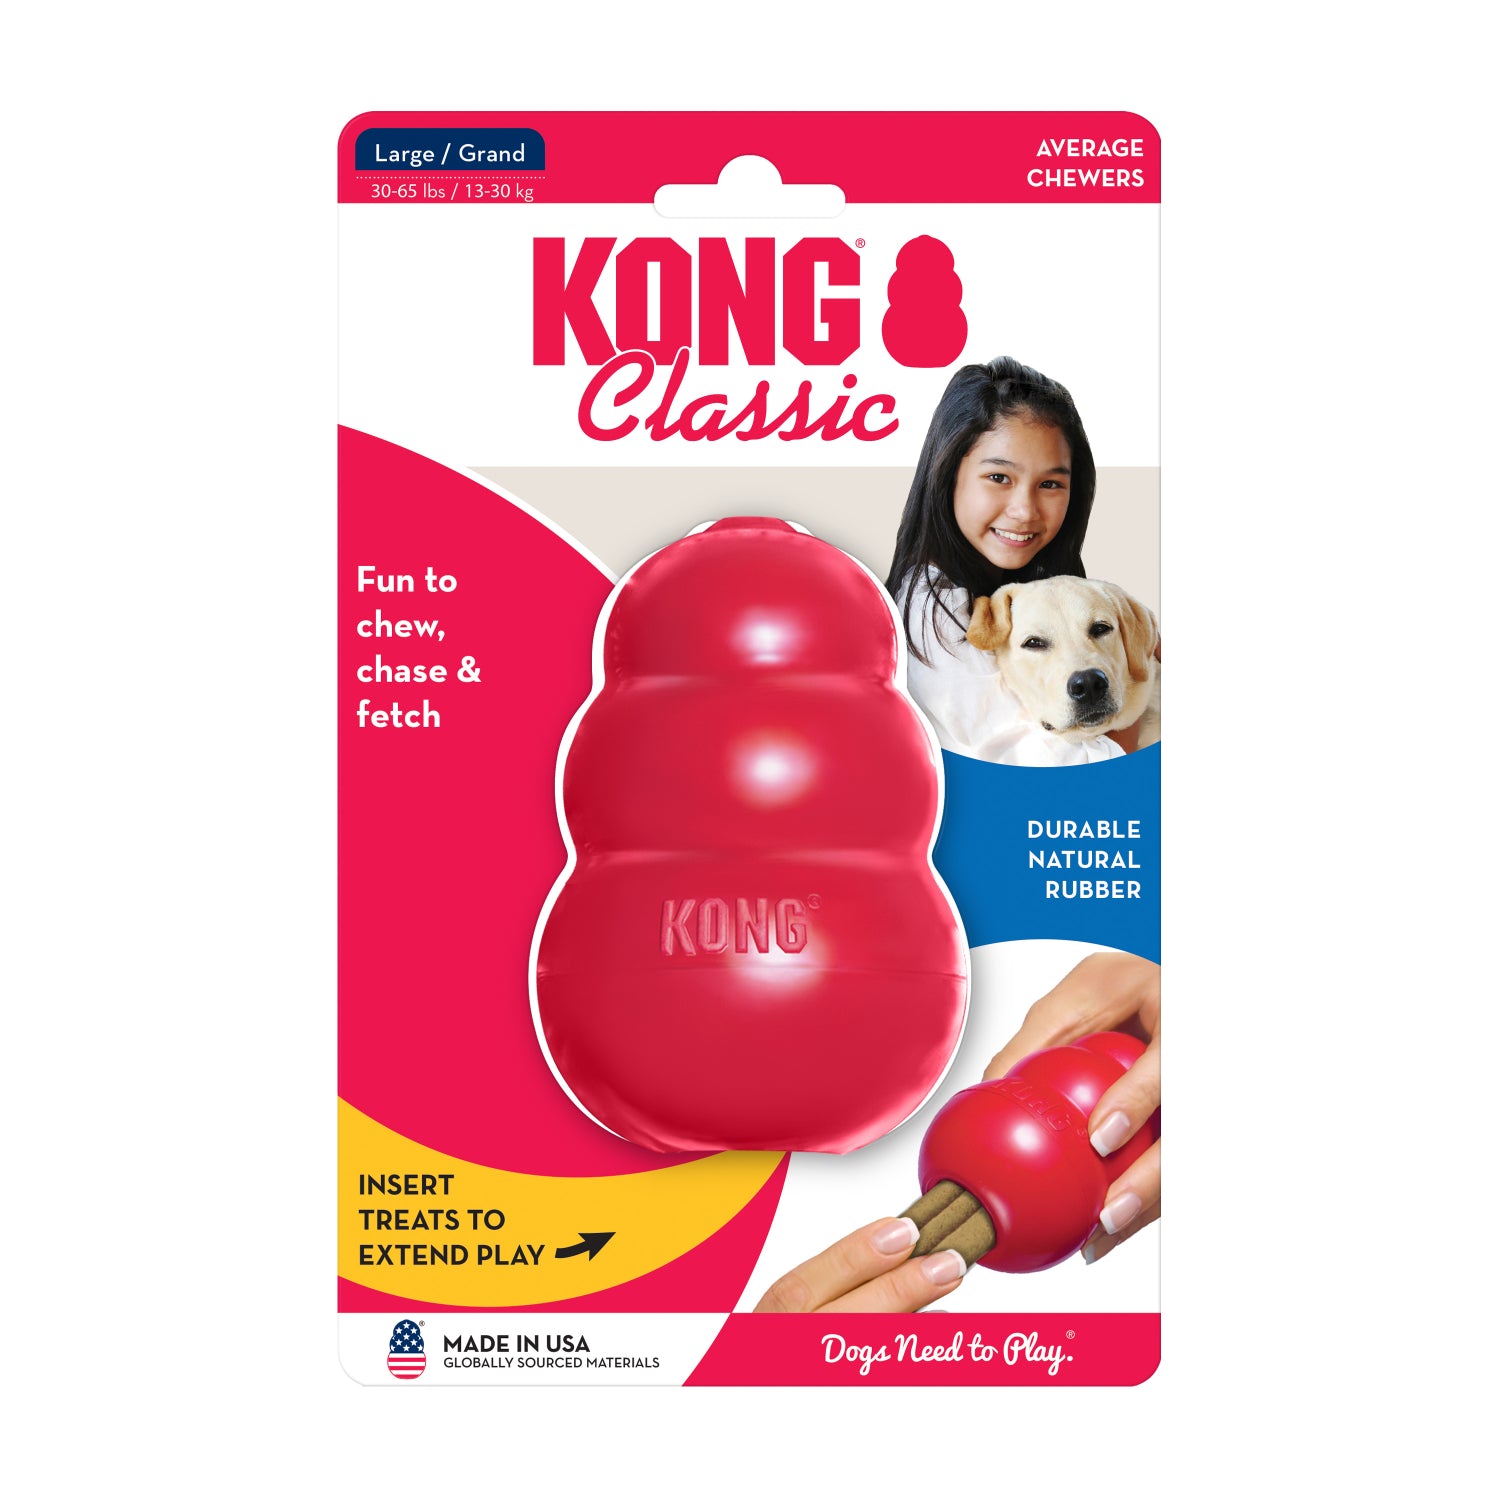 KONG Classic Red - RSPCA VIC